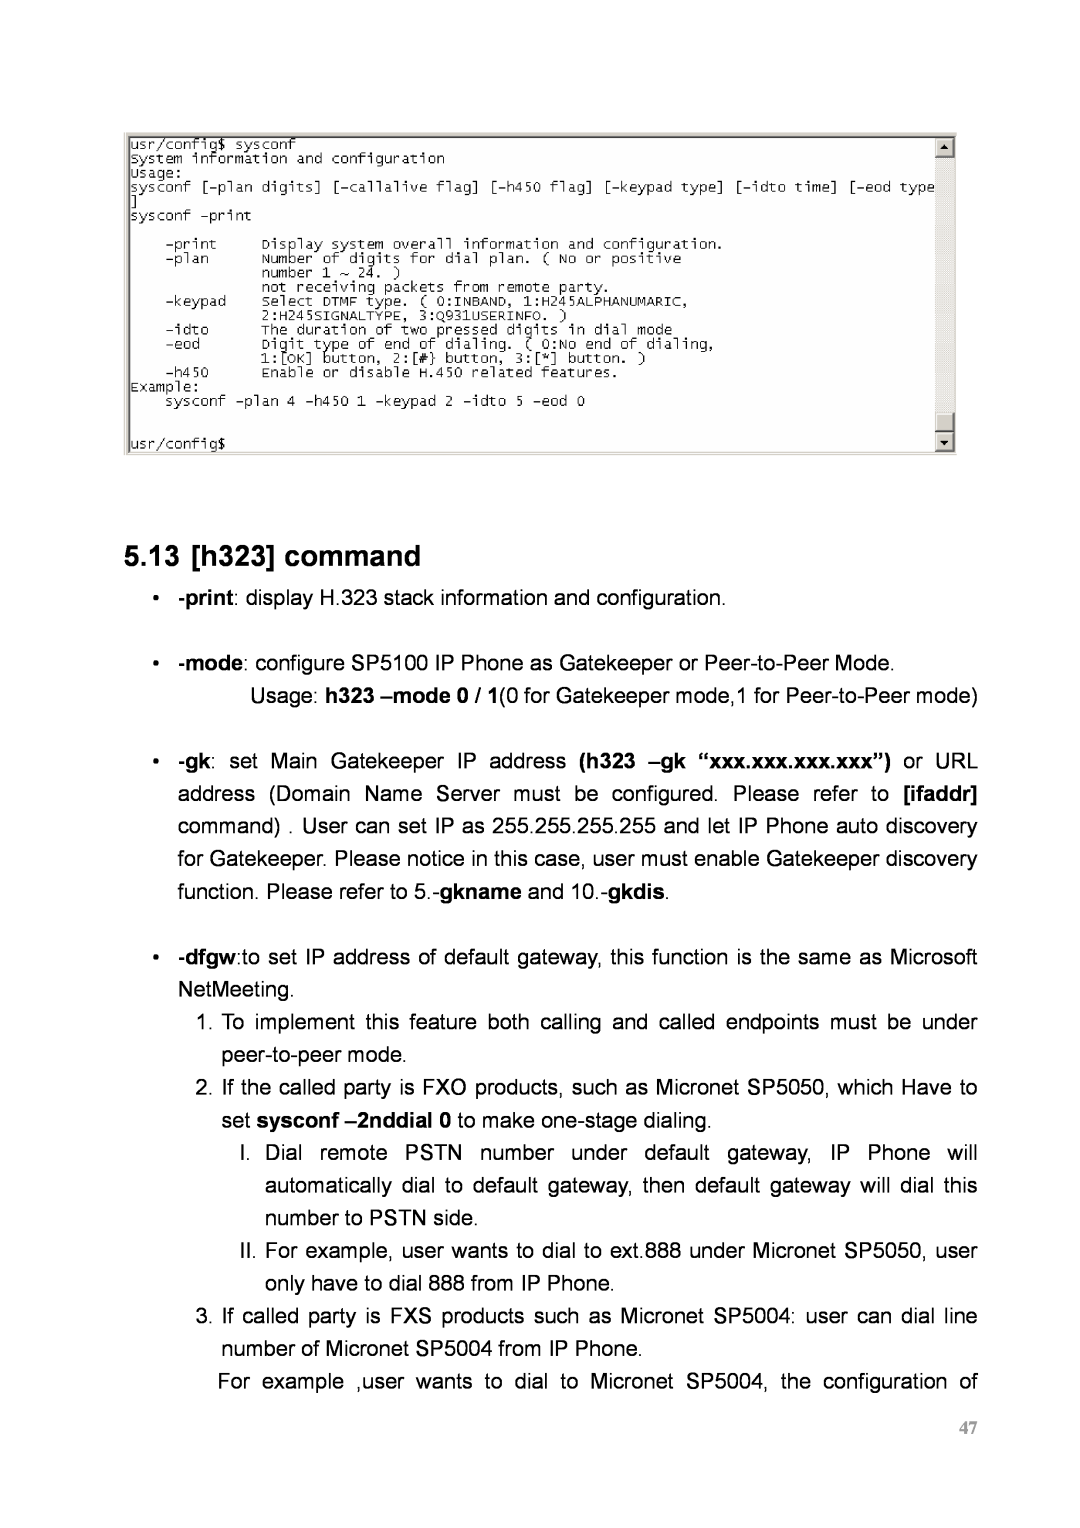 MicroNet Technology SP5100 user manual 5.13 h323 command 